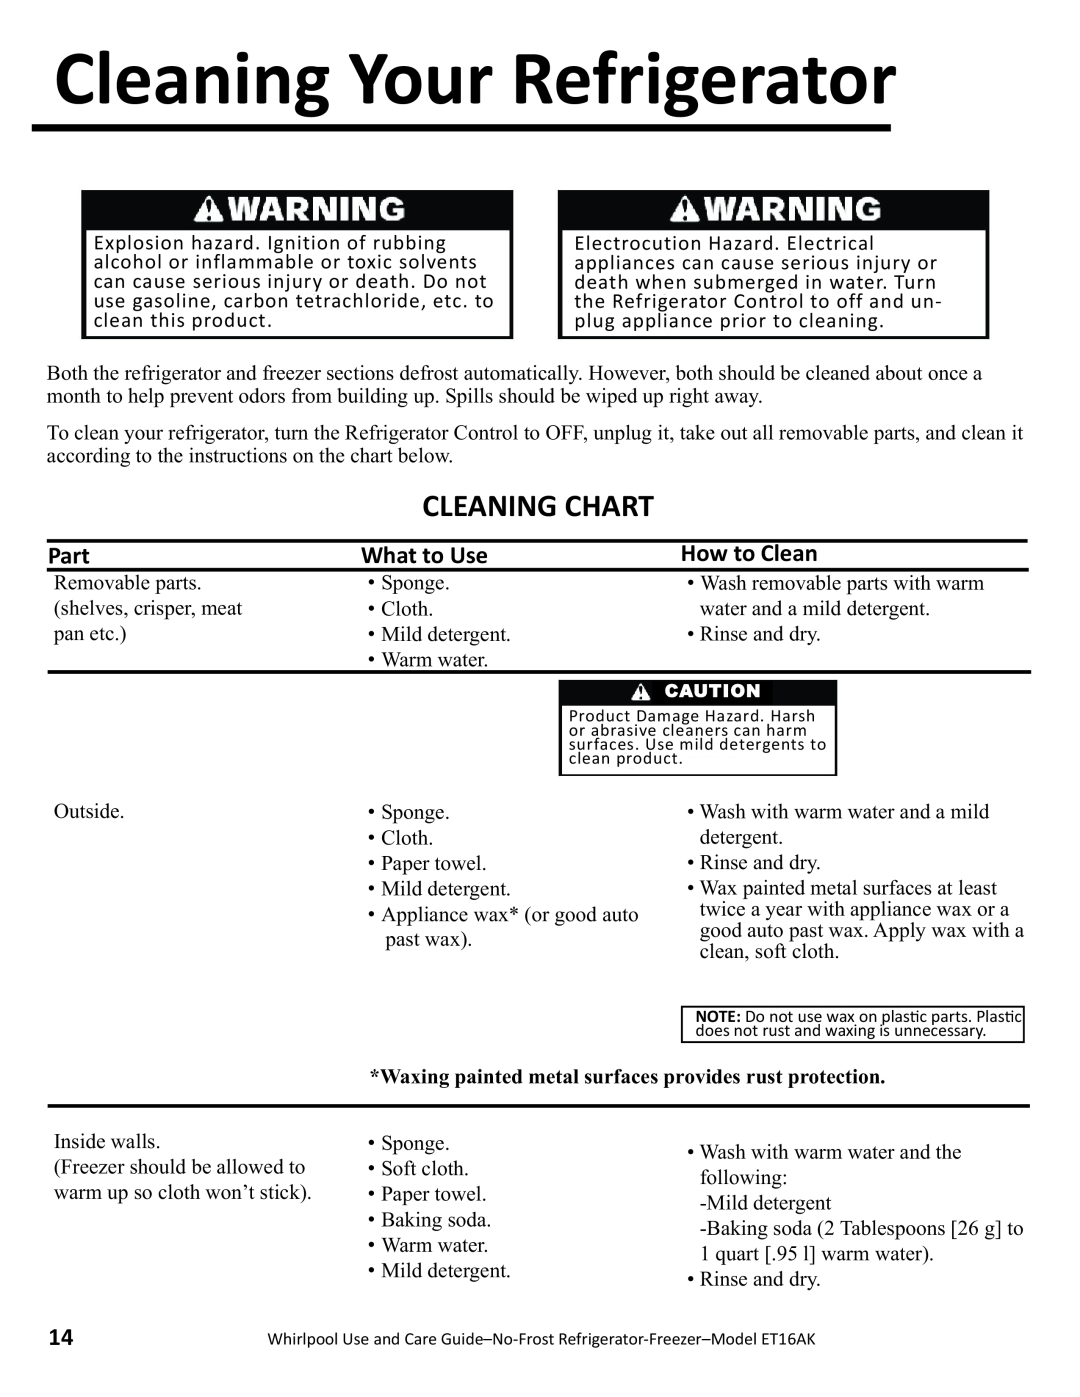 Whirlpool ET16AK manual Cleaning Your Refrigerator, Cleaning Chart, How to Clean, Part, What to Use 